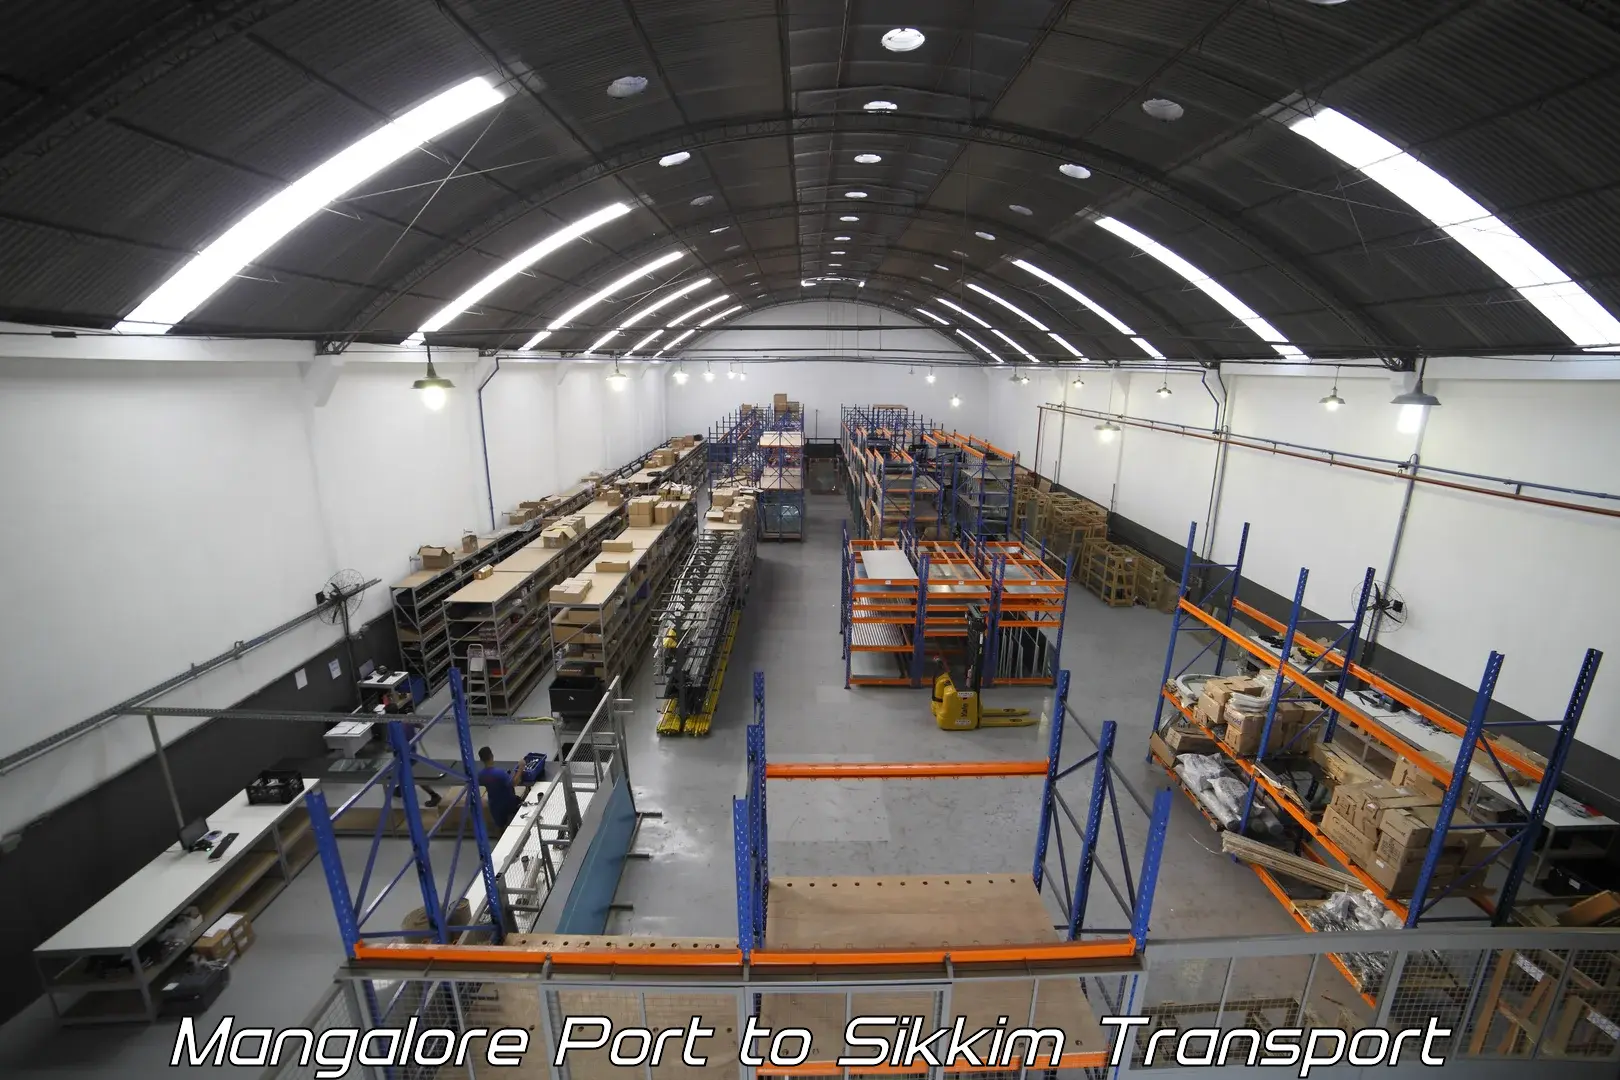 Furniture transport service in Mangalore Port to South Sikkim